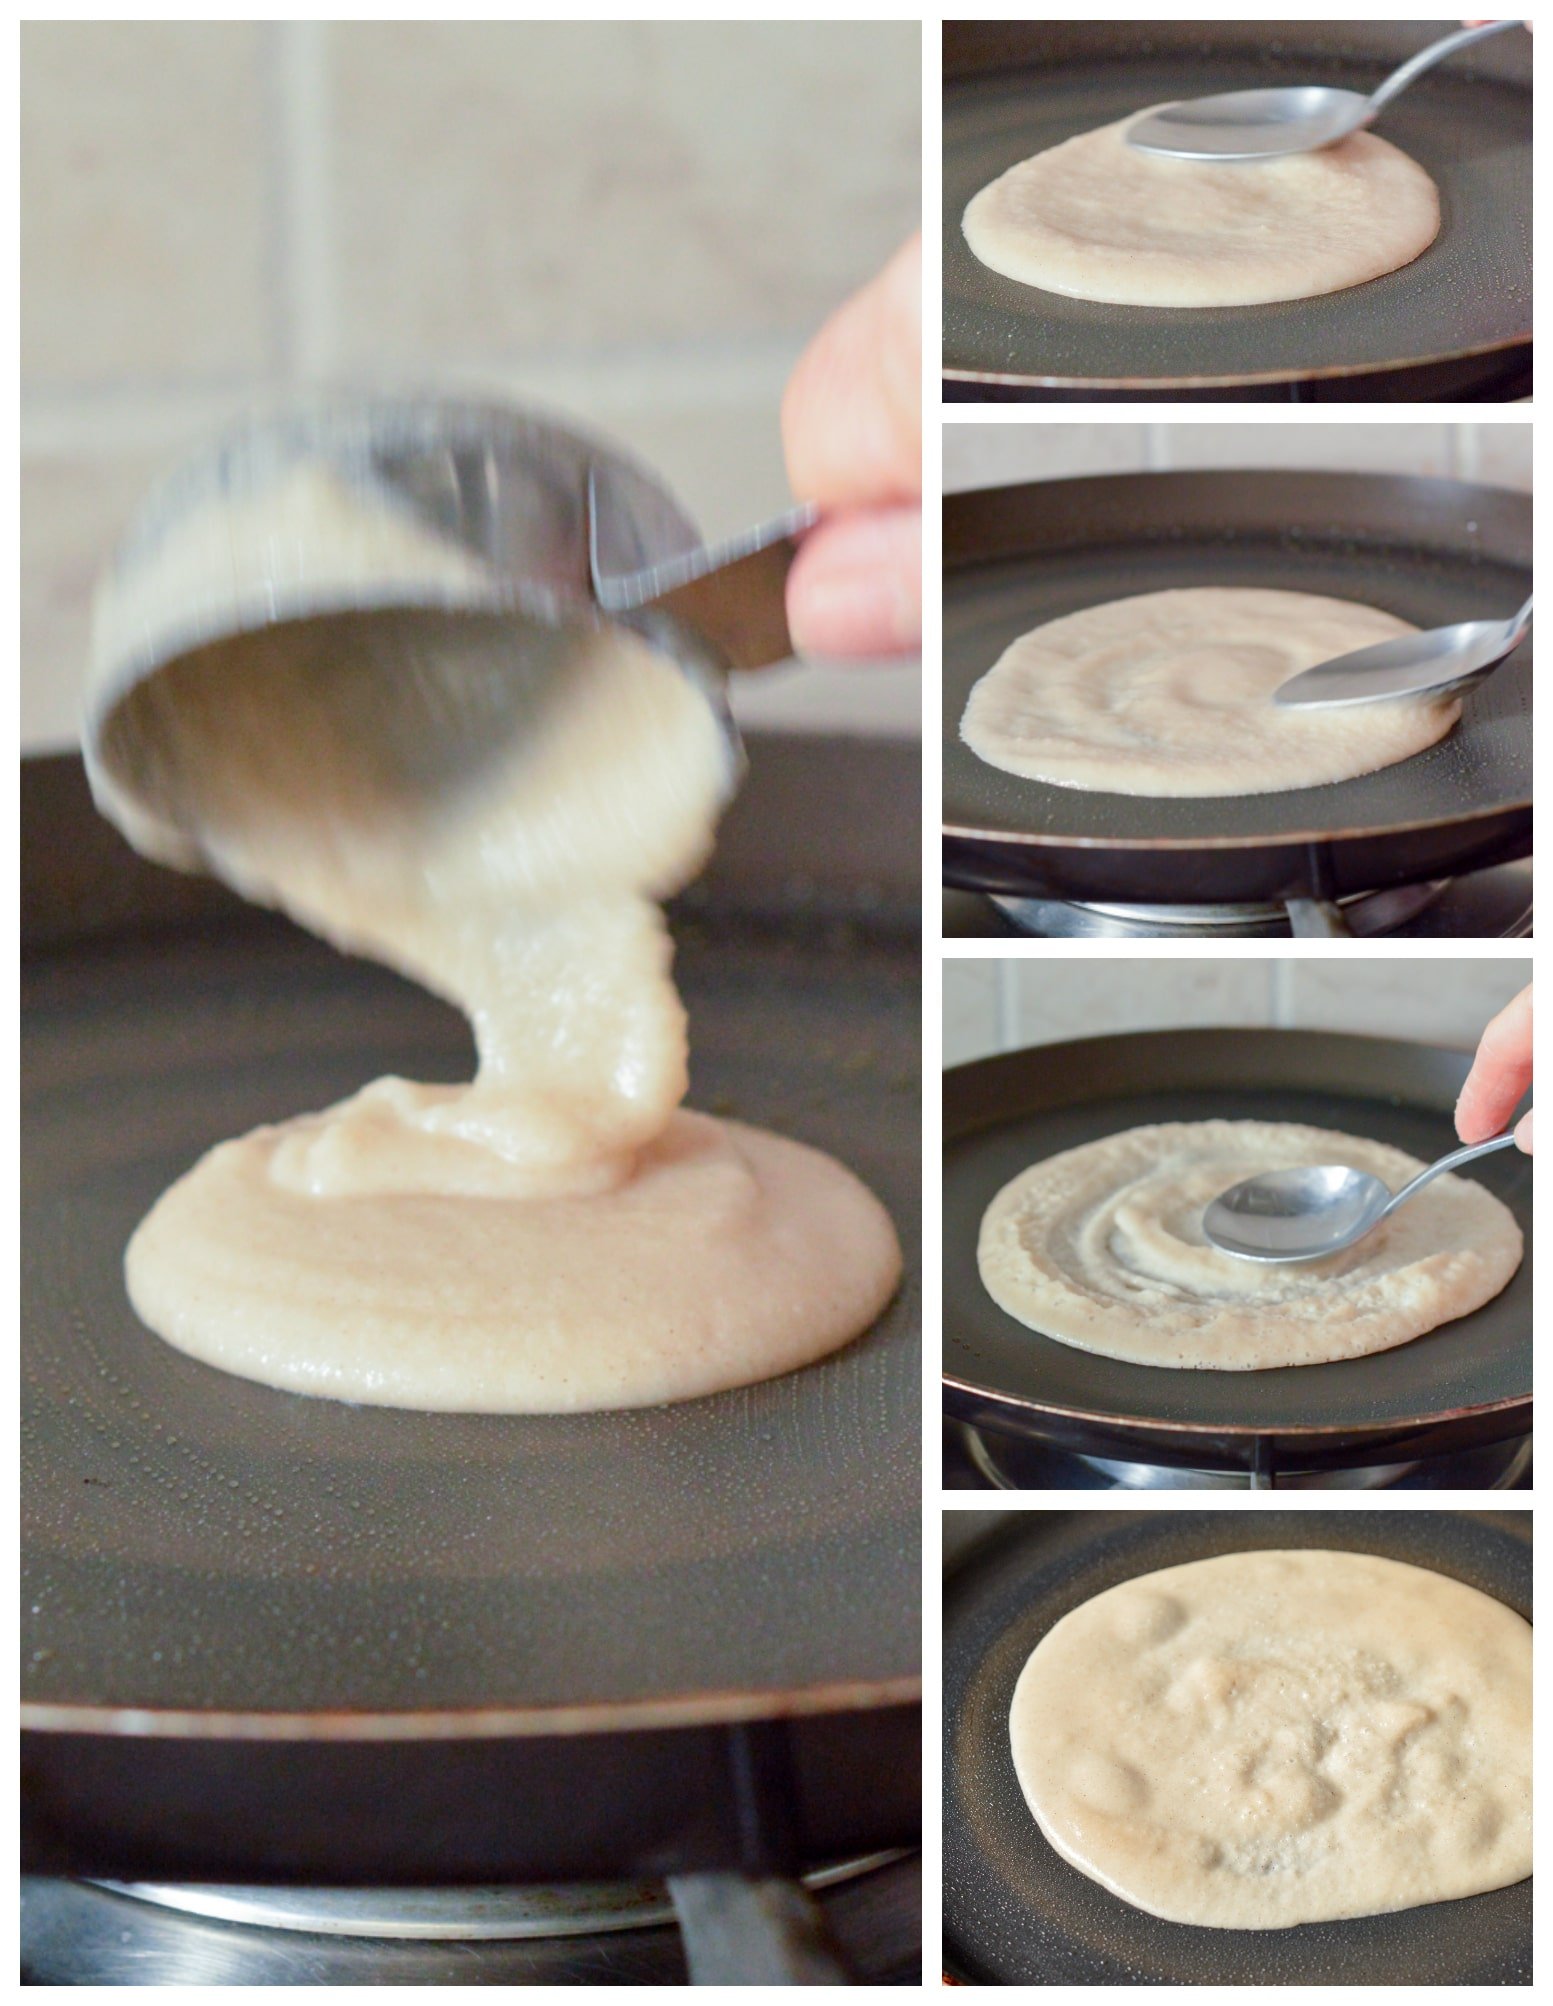 Step-by-step instructions on how to ladle the batter and form Protein Crepes on a crepe pan.